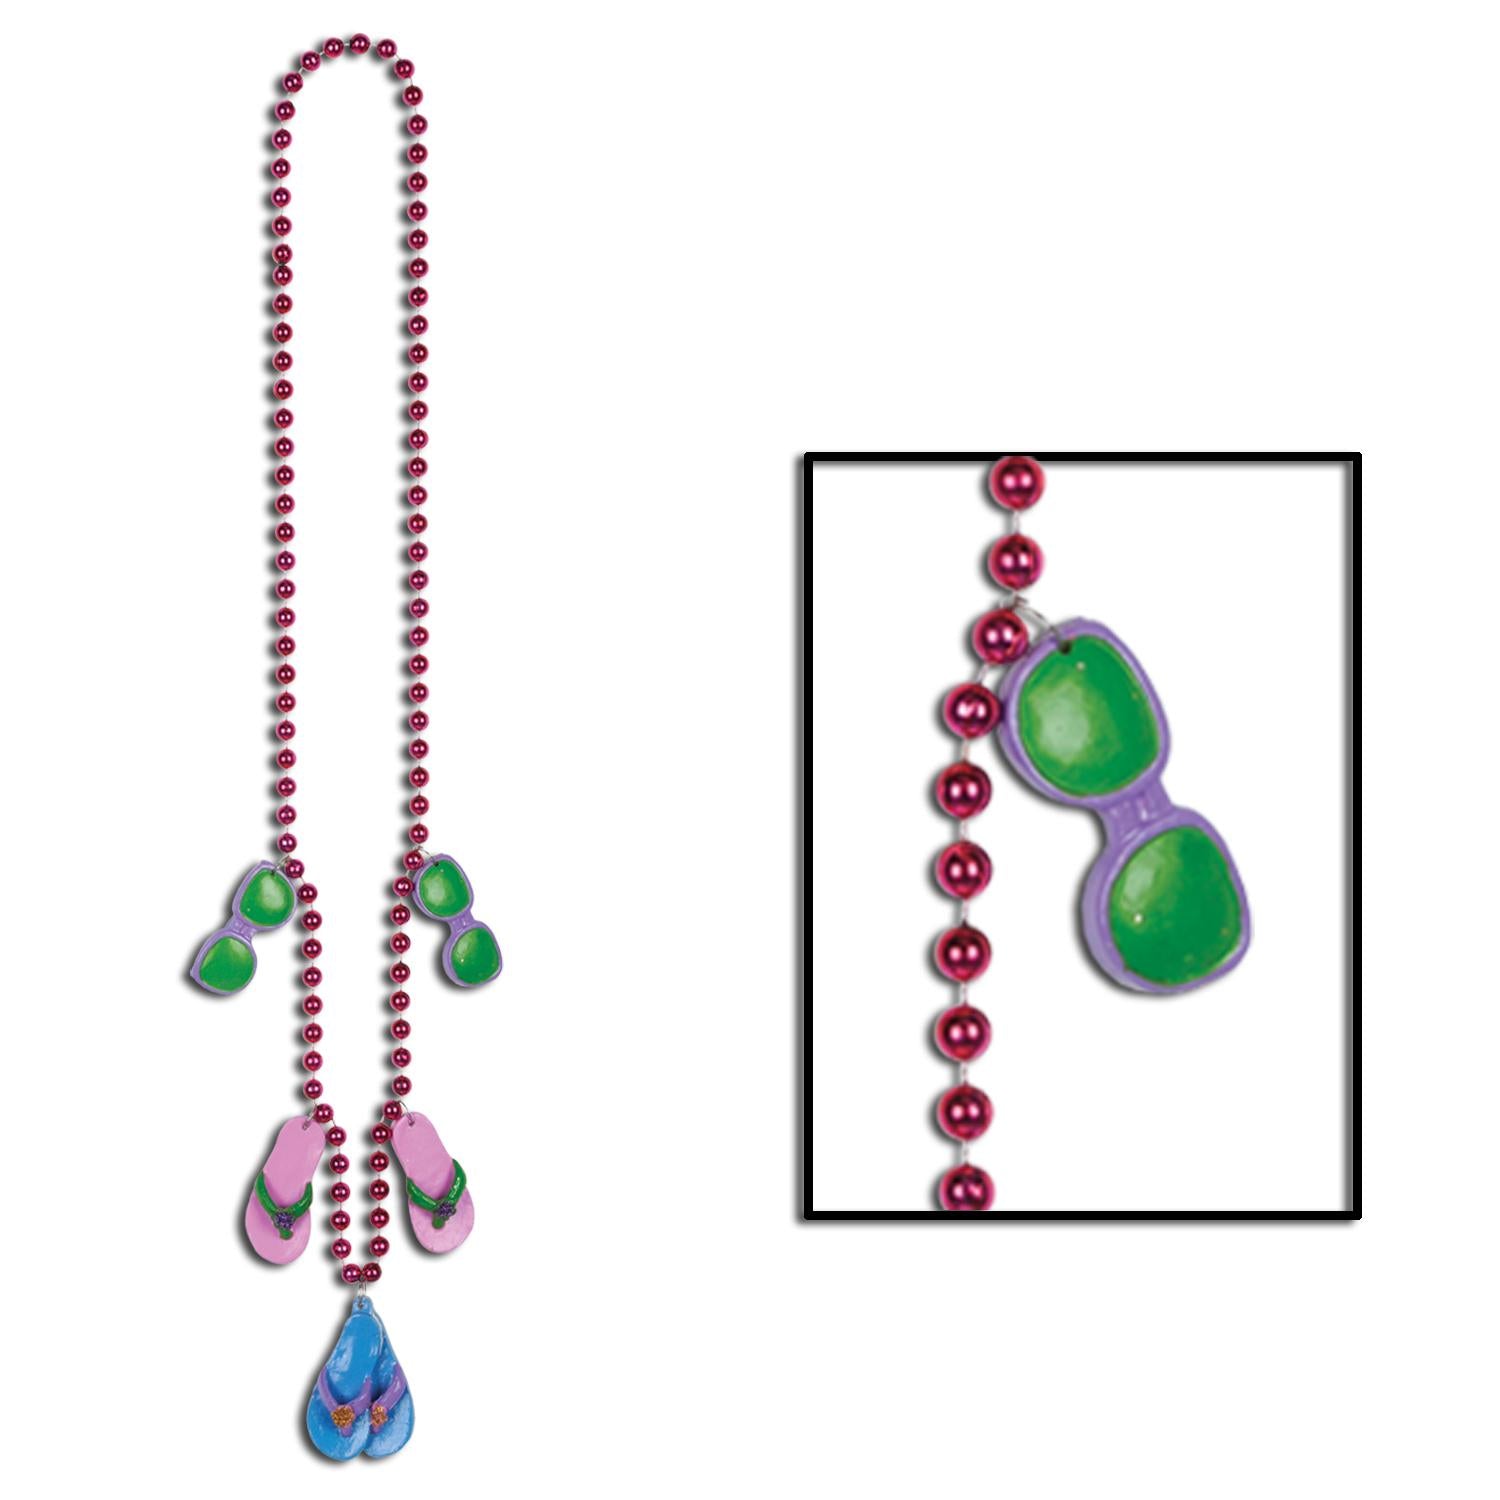 Beistle Luau Party Bead Necklaces with Flip Flop Medallions